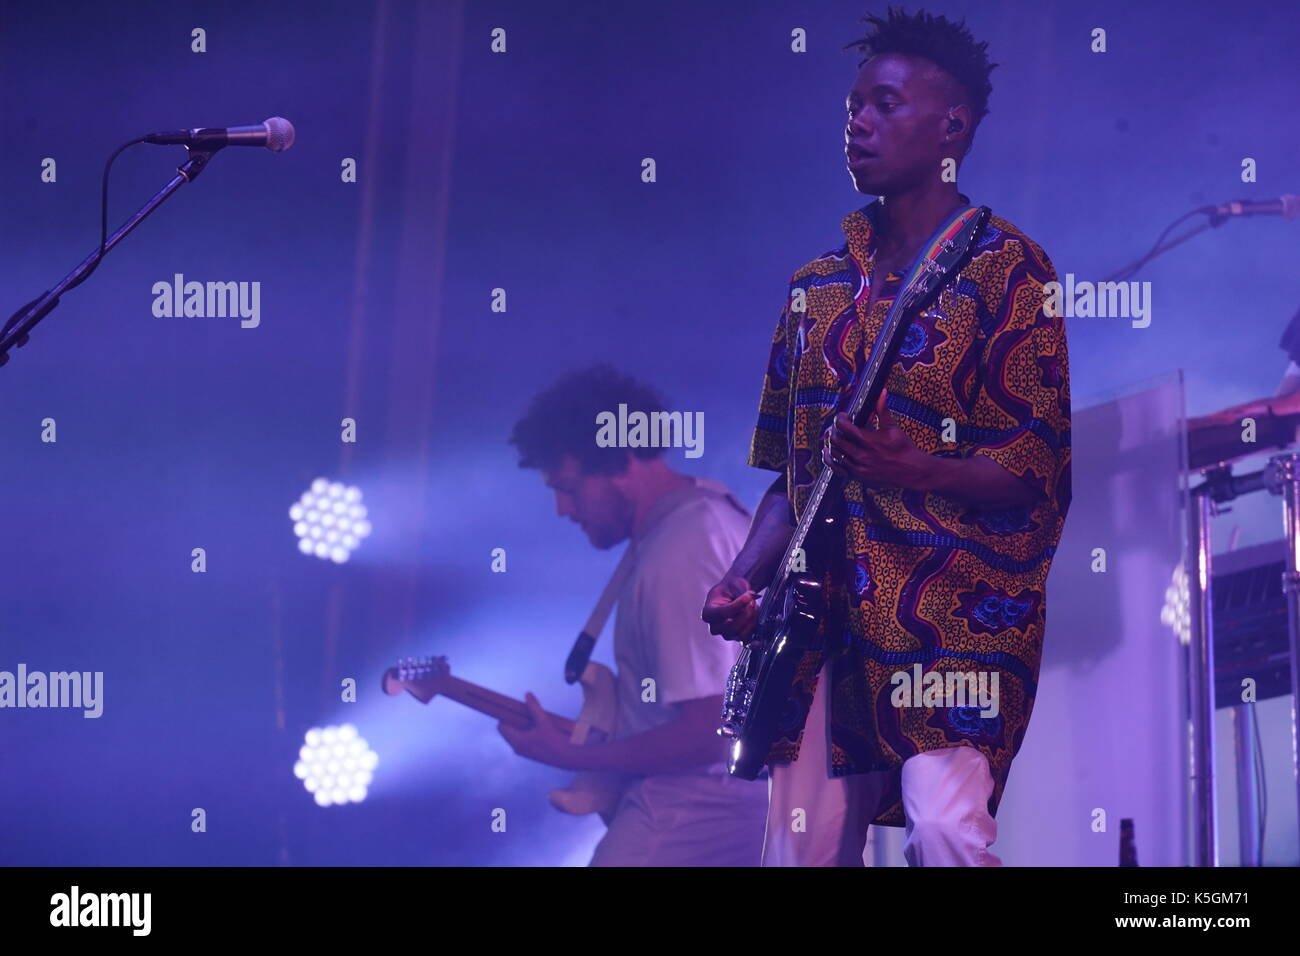 London, UK. 9th September, 2017. Gbenga Adelekan of Metronomy performing live on the Main Stage at the 2017 OnBlackheath Festival in Blackheath, London. Photo date: Saturday, September 9, 2017. Photo credit should read: Roger Garfield/Alamy Live News Stock Photo